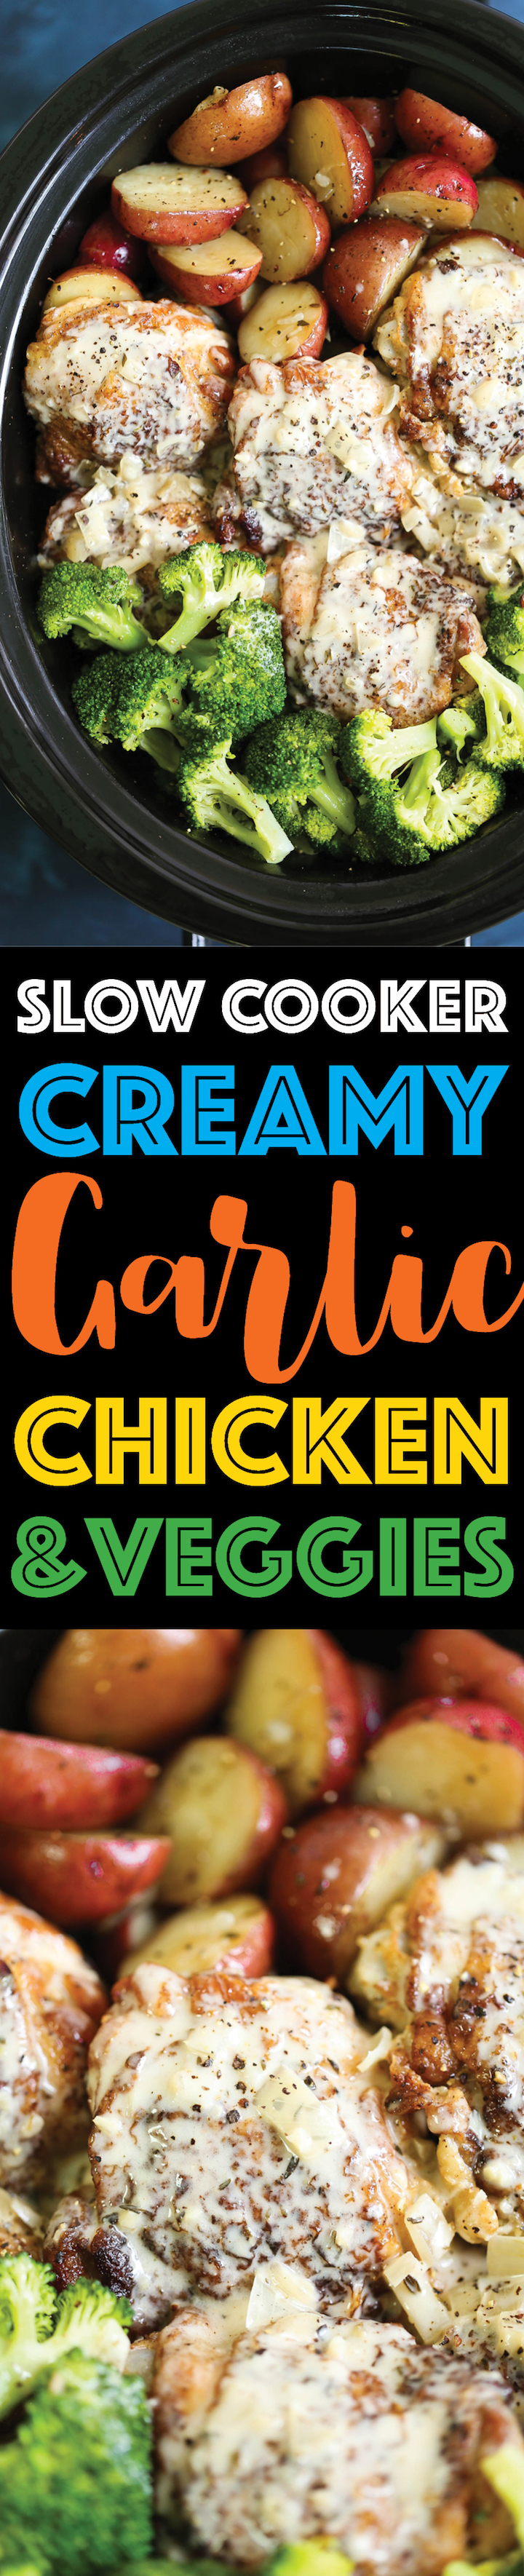 Slow Cooker Garlic Butter Chicken and Veggies - The Magical Slow Cooker